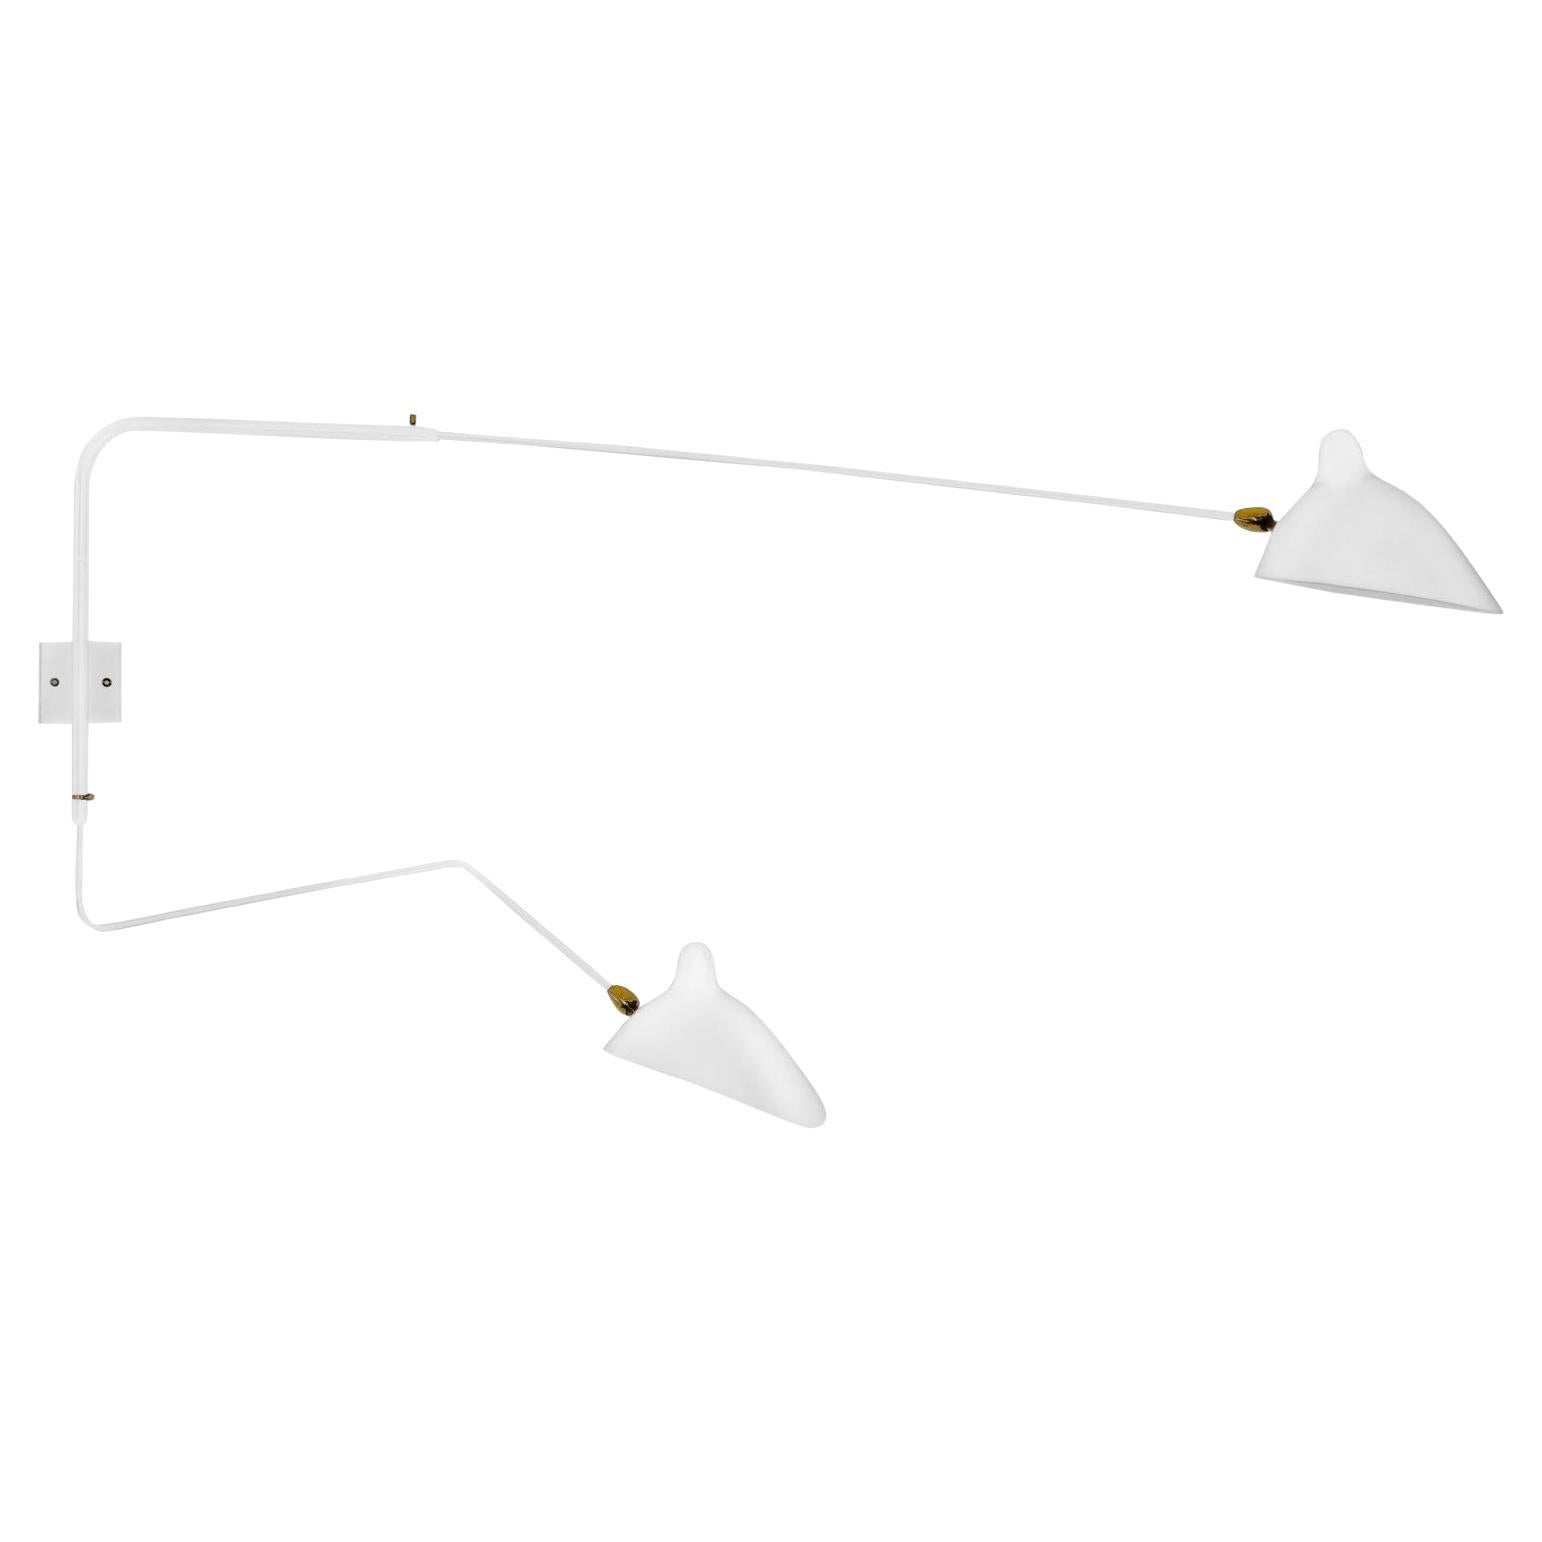 Serge Mouille - Rotating Sconce with 2 Arms (1 Curved) in White - IN STOCK! For Sale